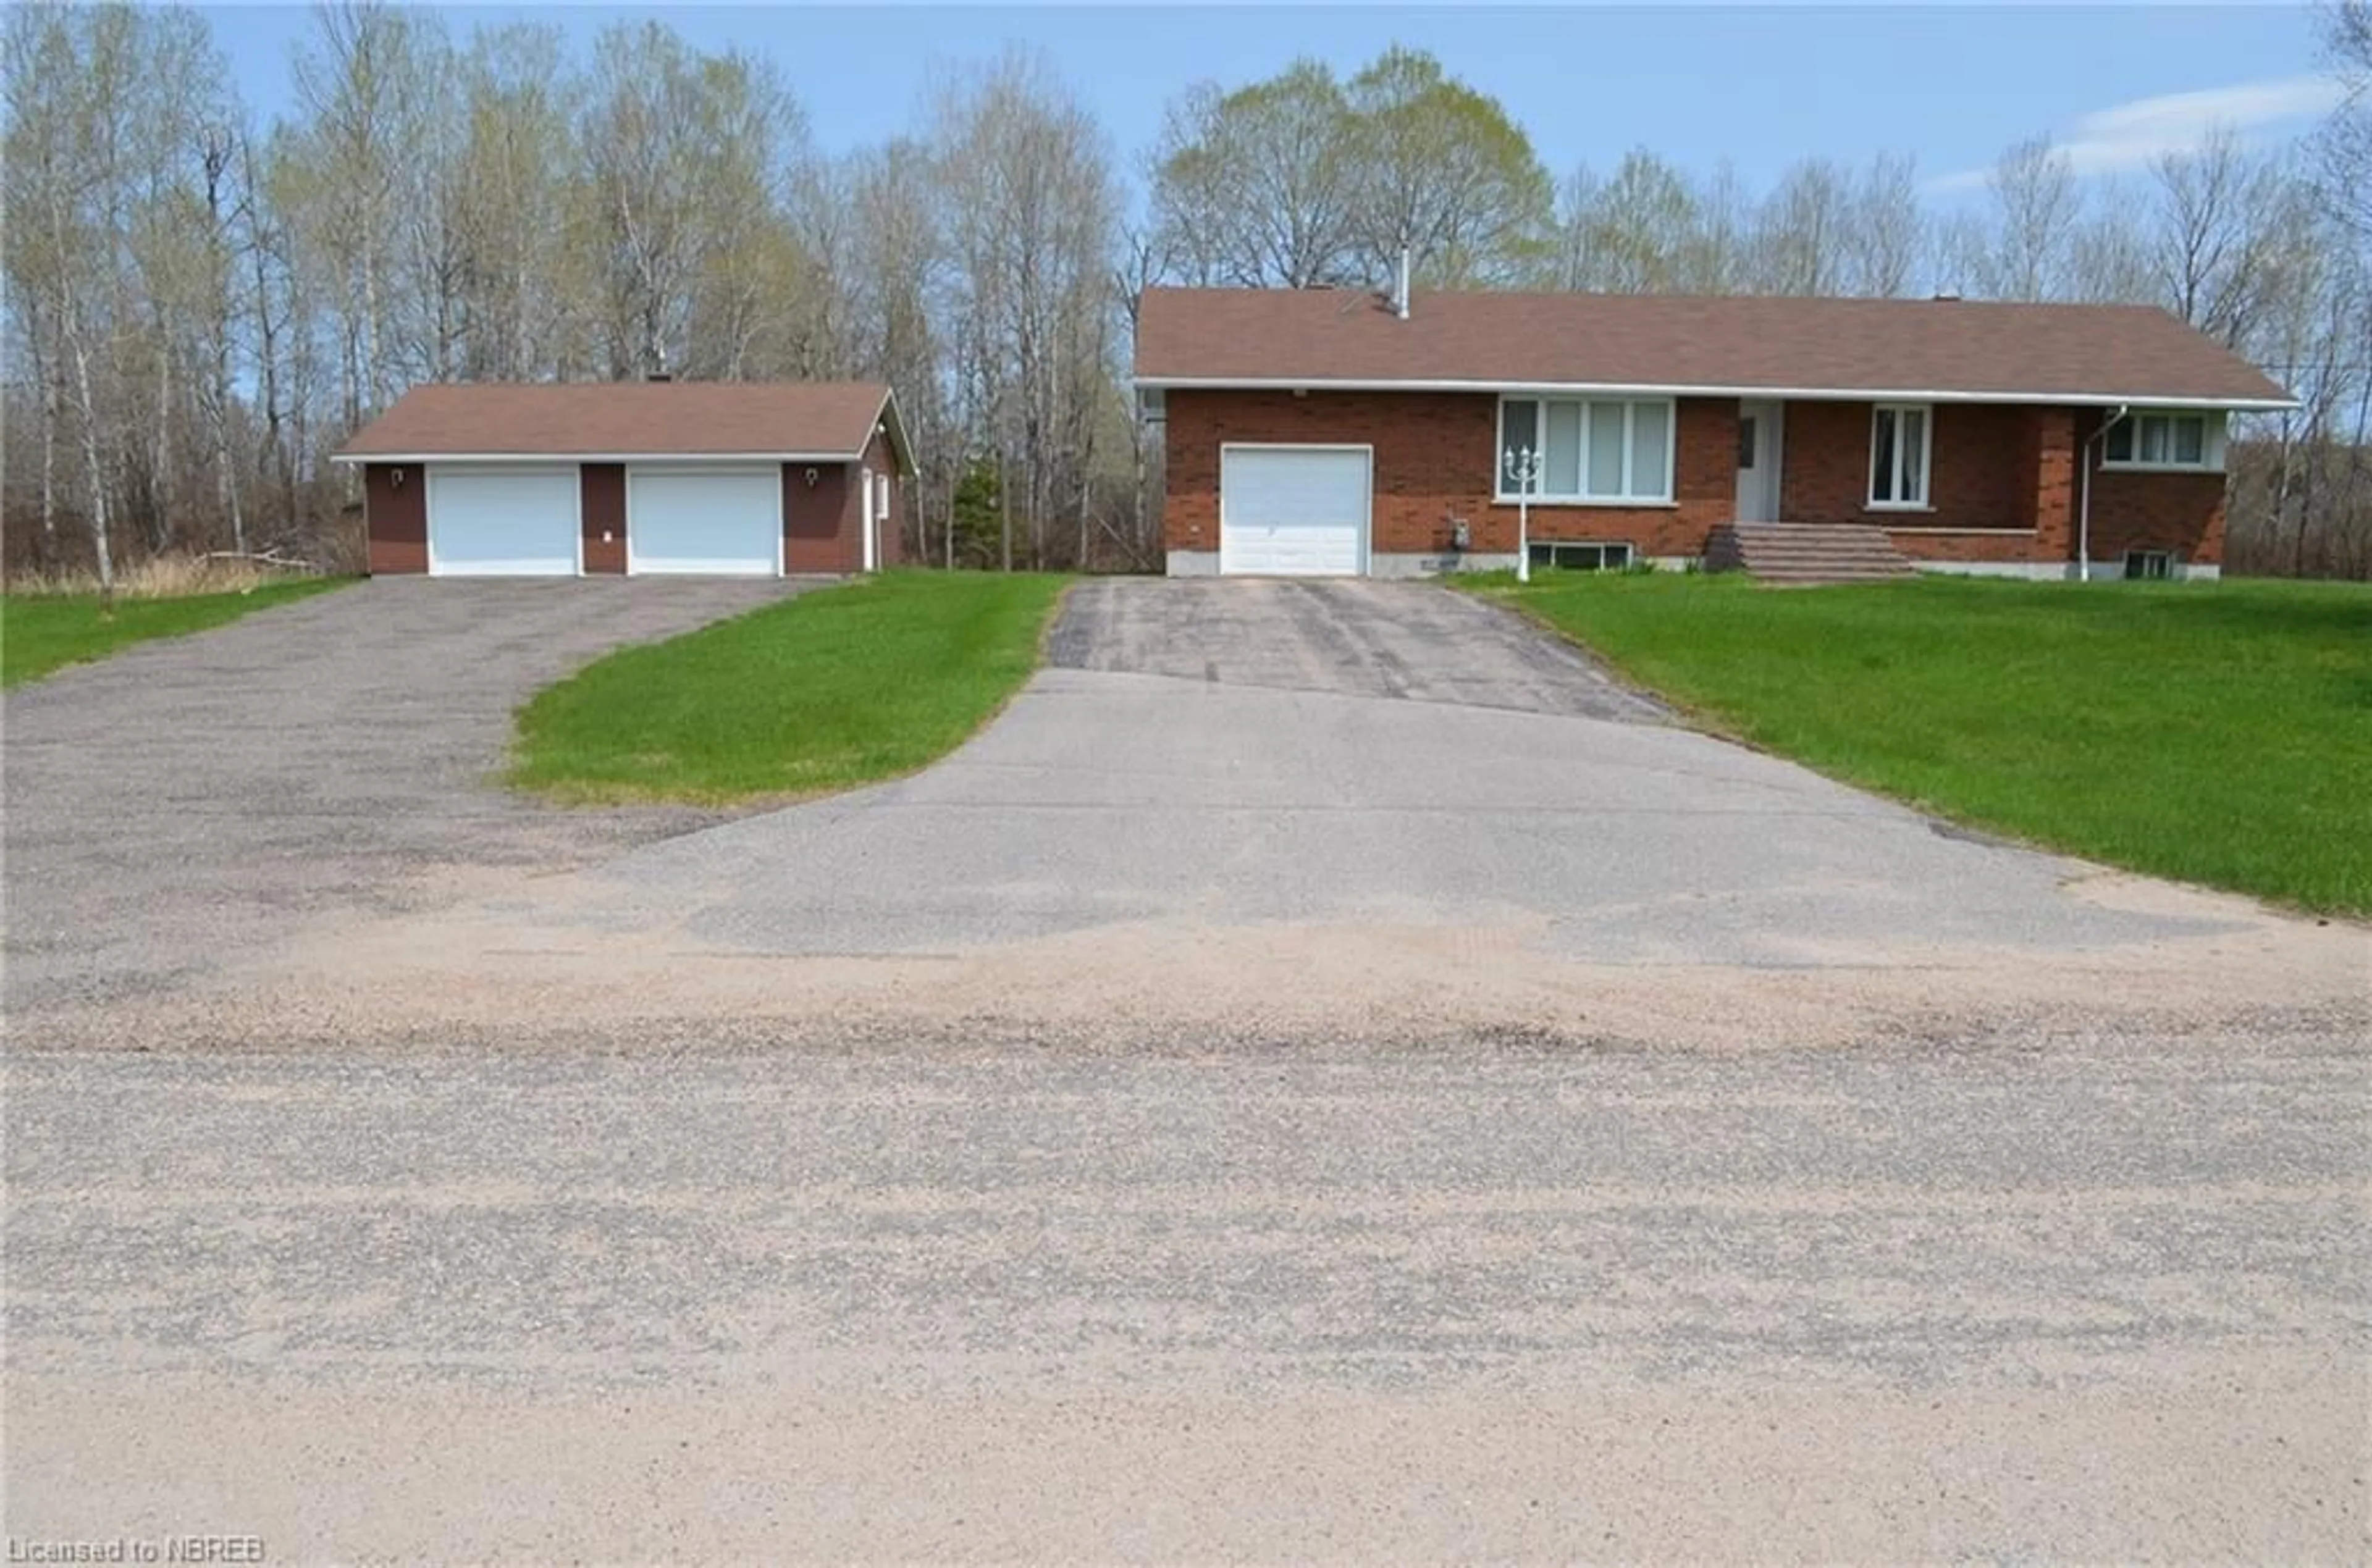 Frontside or backside of a home for 492 Mccarthy St, Trout Creek Ontario P0H 2L0